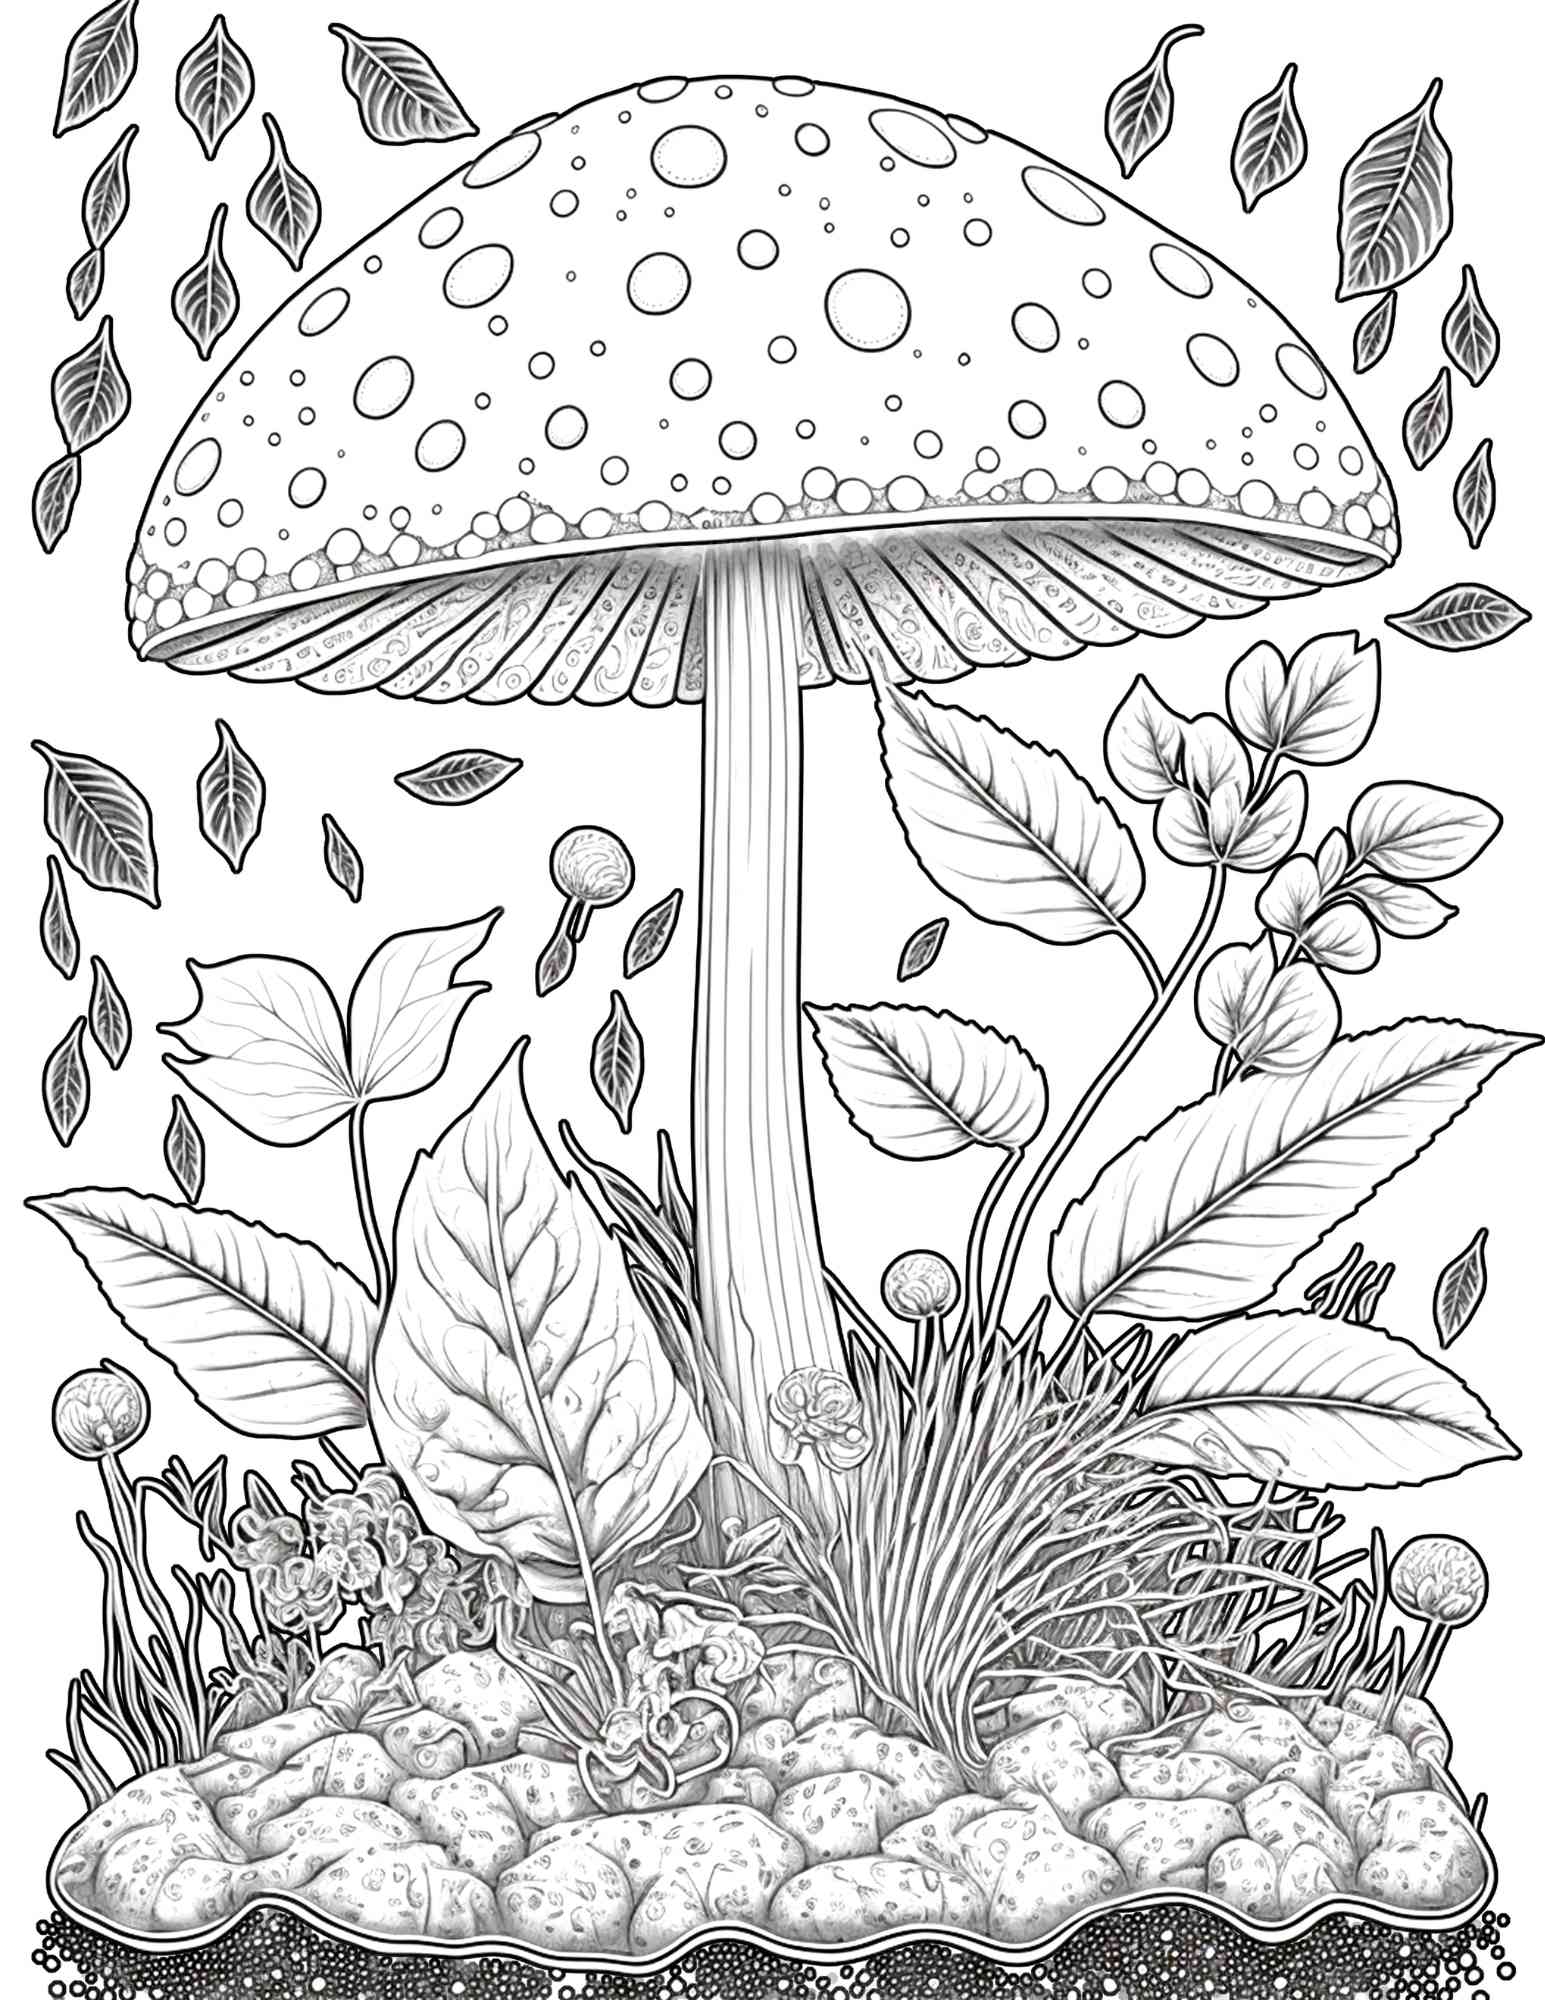 100 Mushroom Forest Coloring Pages Printable for Adults and Kids, Gray